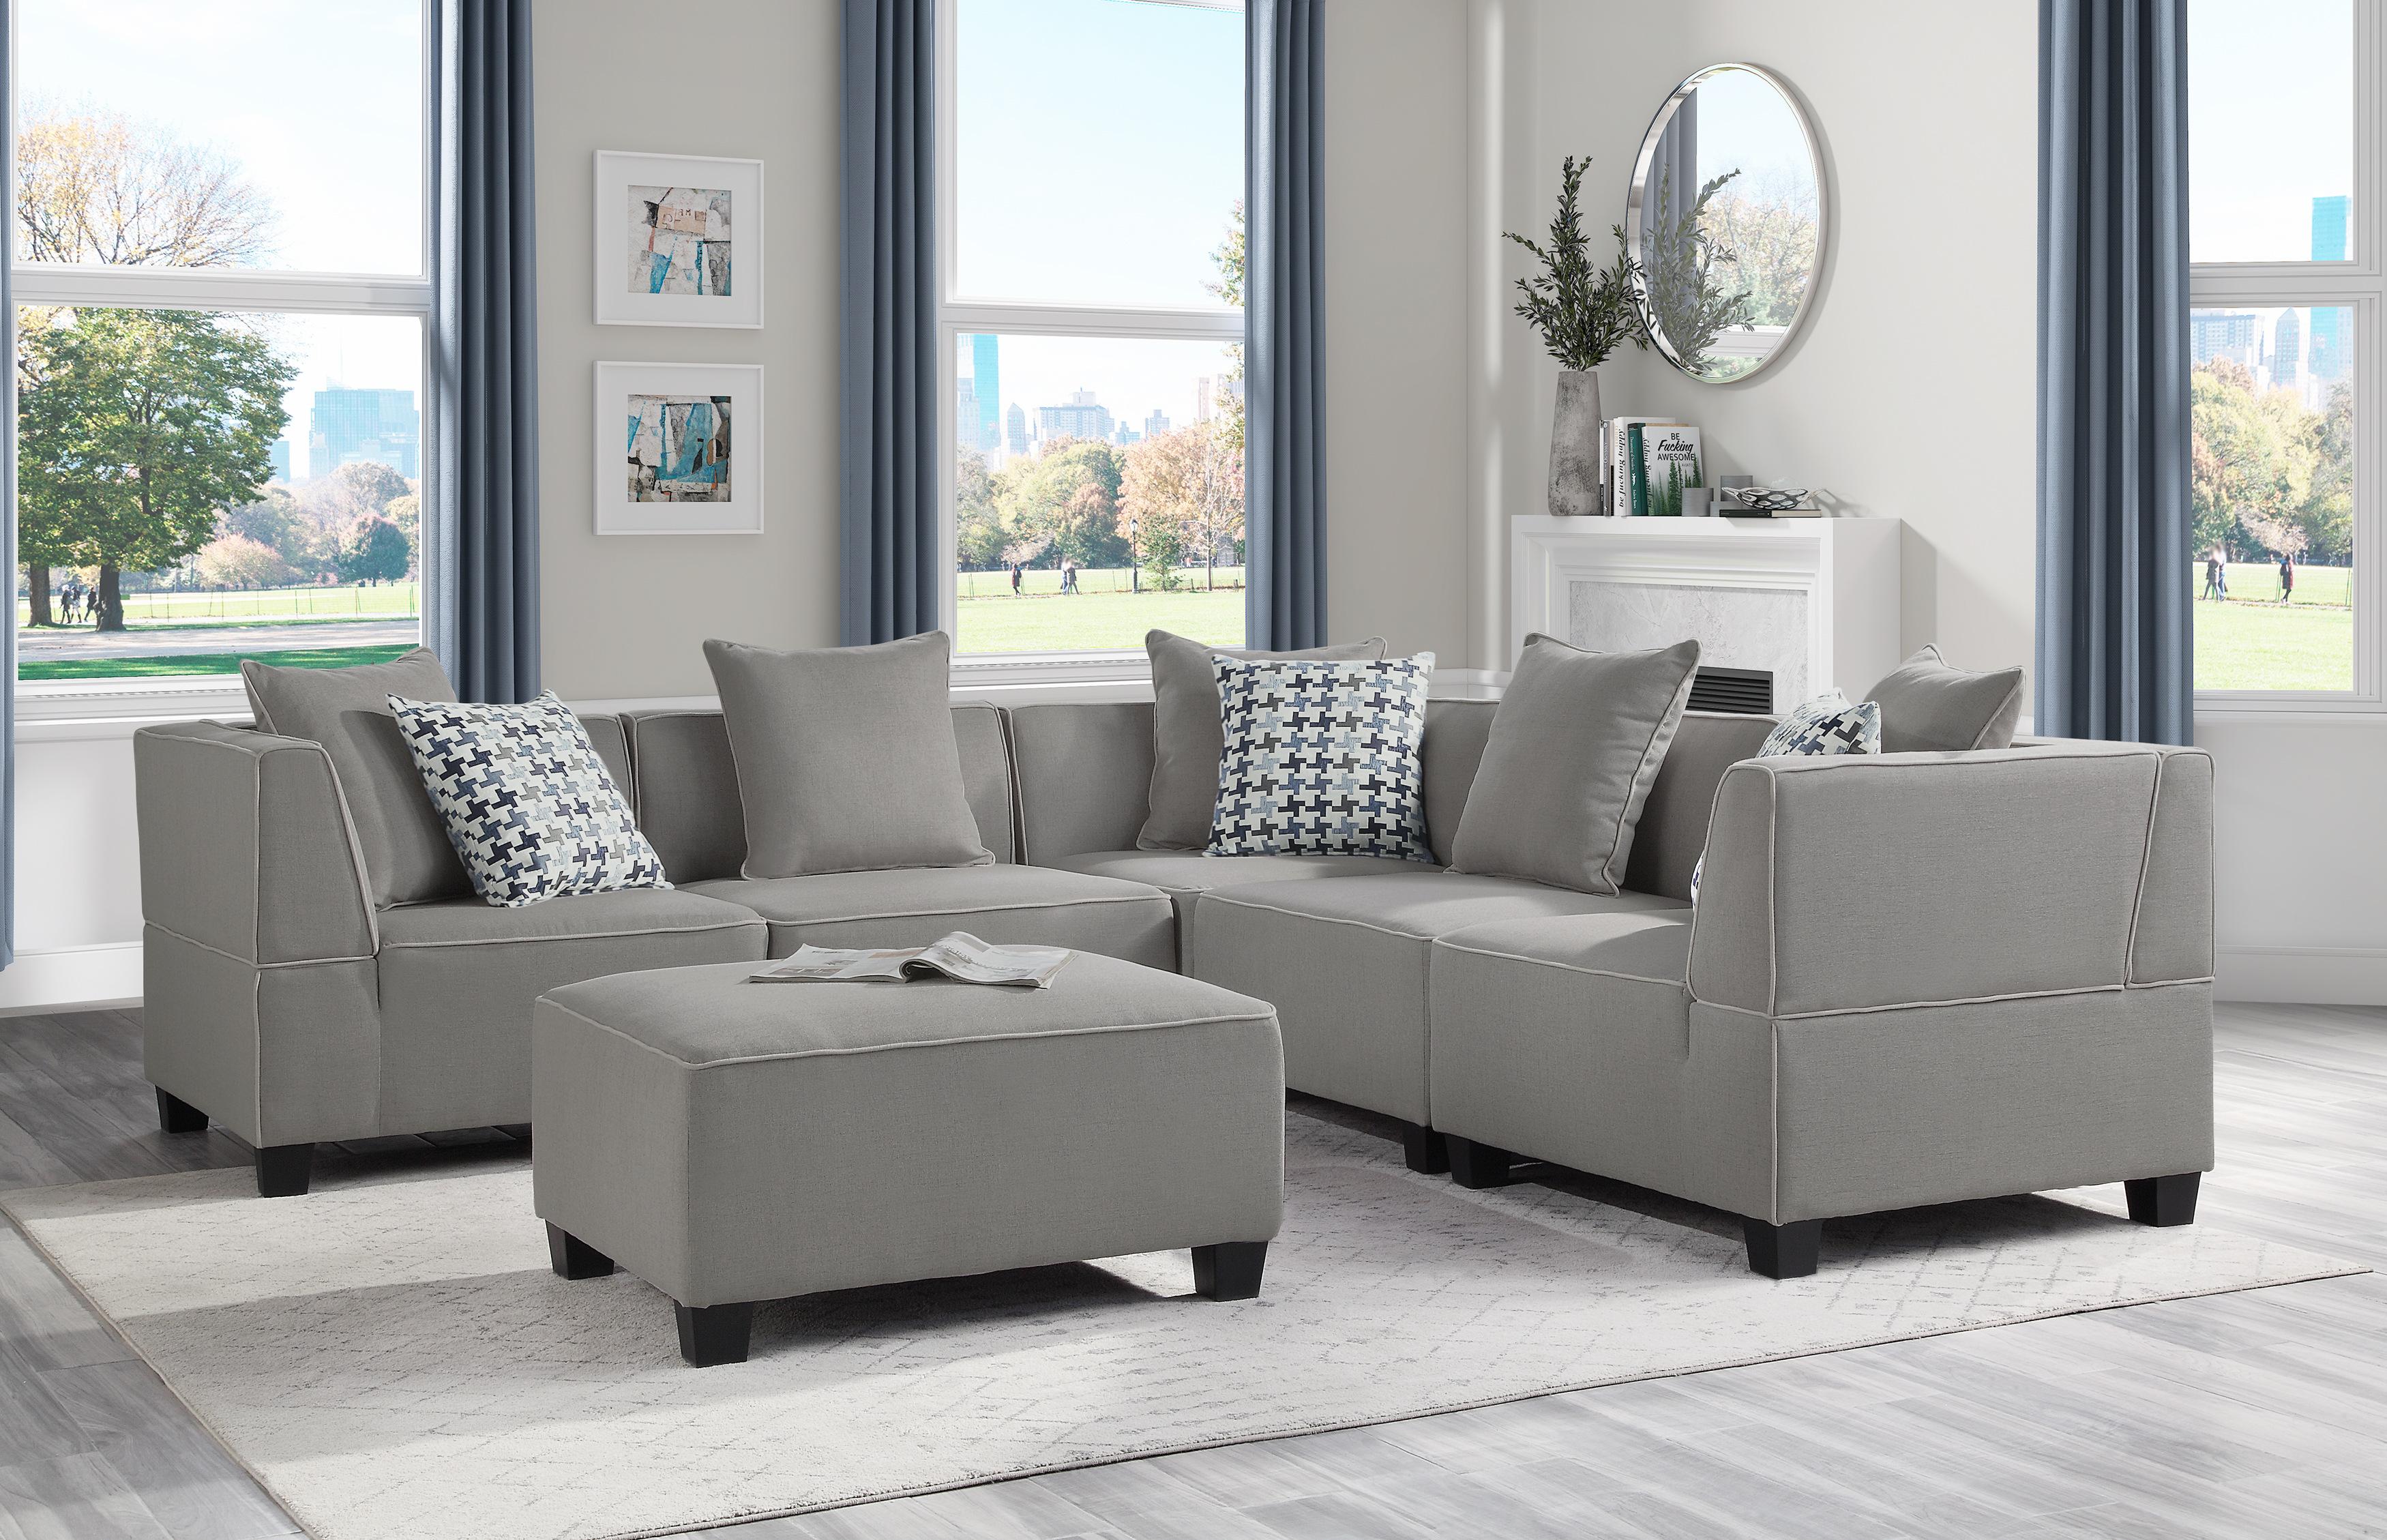 Modern Sectional w/ Ottoman 9357GY*6SC Jayne 9357GY*6SC in Gray 